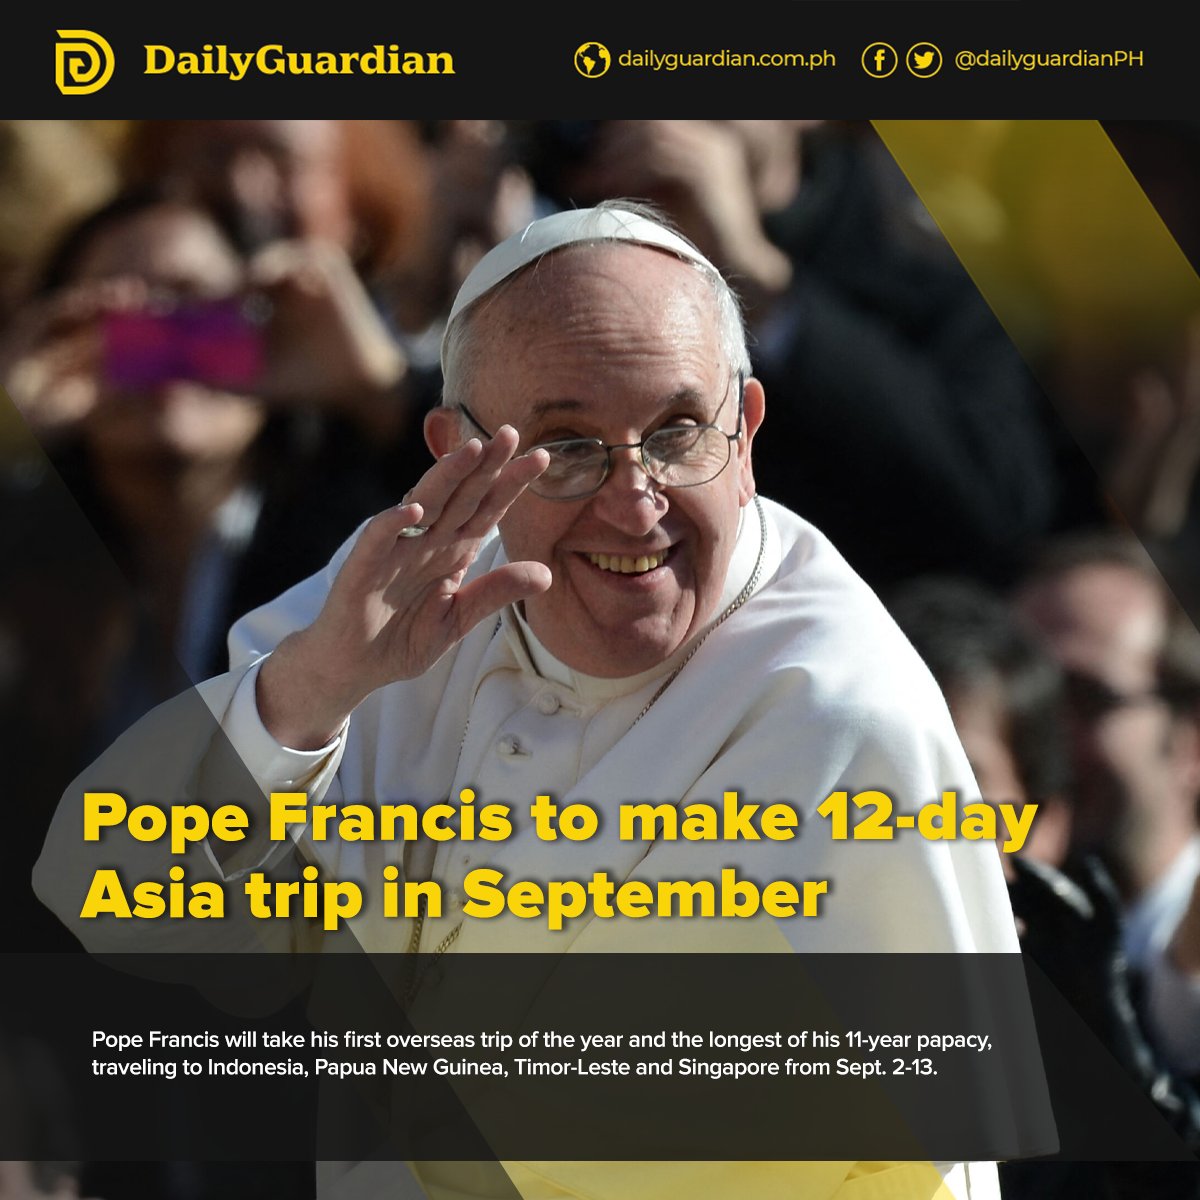 Pope Francis will take his first overseas trip of the year and the longest of his 11-year papacy, traveling to Indonesia, Papua New Guinea, Timor-Leste and Singapore from September 2 to 13. facebook.com/DailyGuardianP…